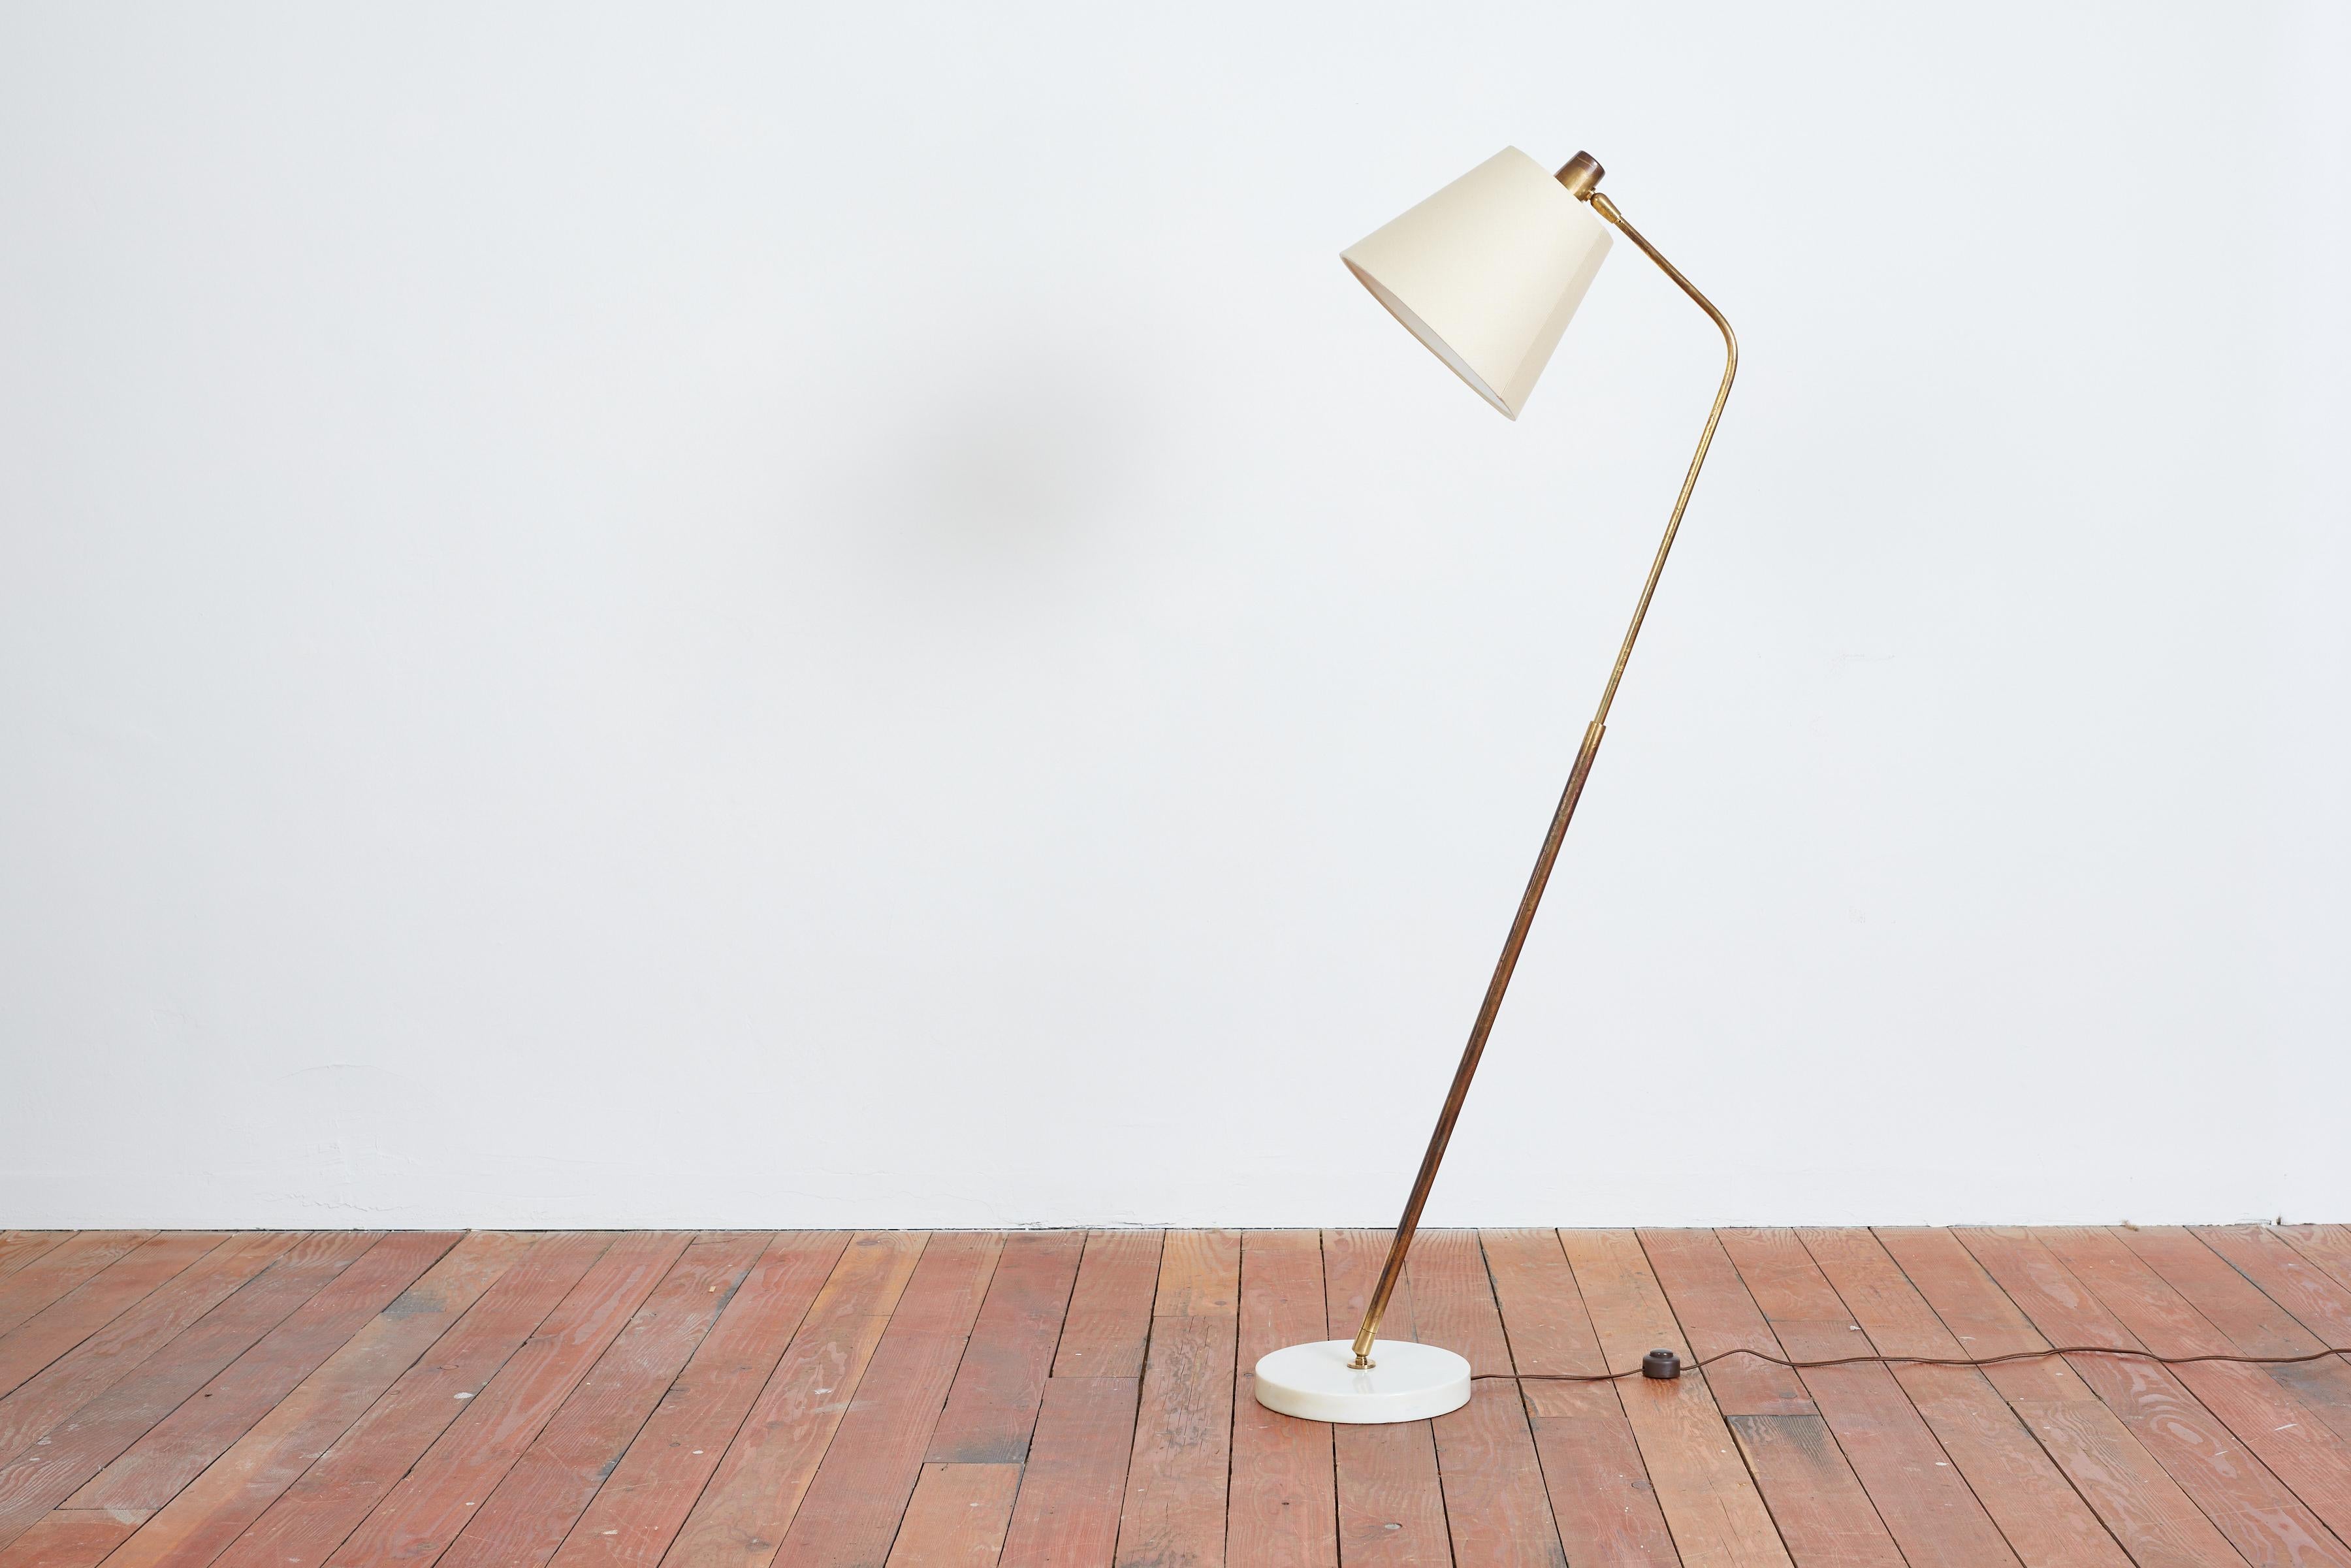 Beautiful floorlamp by Giuseppe Ostuni 
Produced by O-Luce, Italy, 1950s
Carrera marble base with burnished brass stem and new silk shade. 
Adjustable /tilting mechanism that allows lamp to move in all directions 
Bulb Specifications: E-26 Bulb